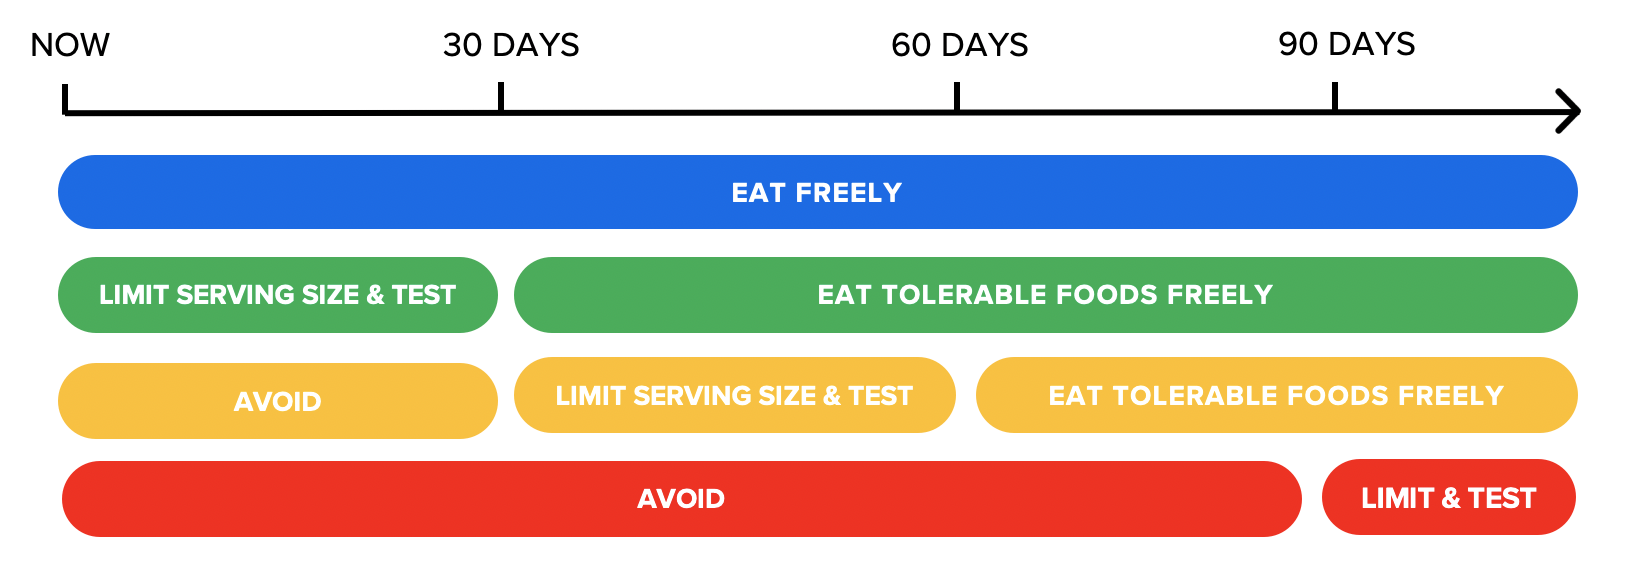 How to eat these foods over the next 90 days